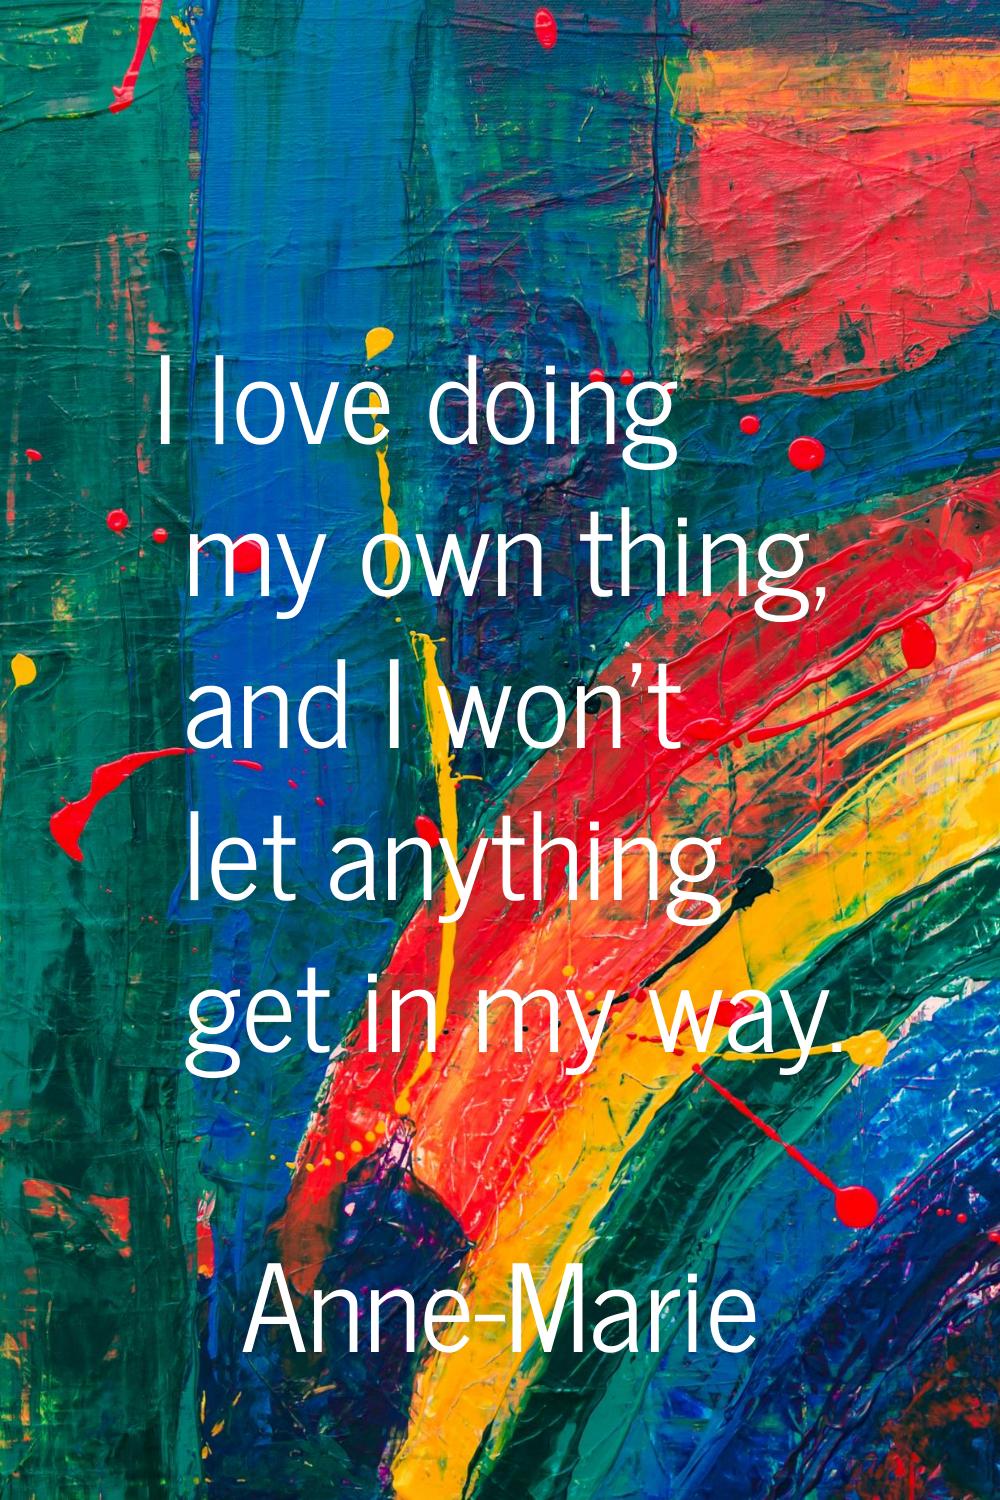 I love doing my own thing, and I won't let anything get in my way.